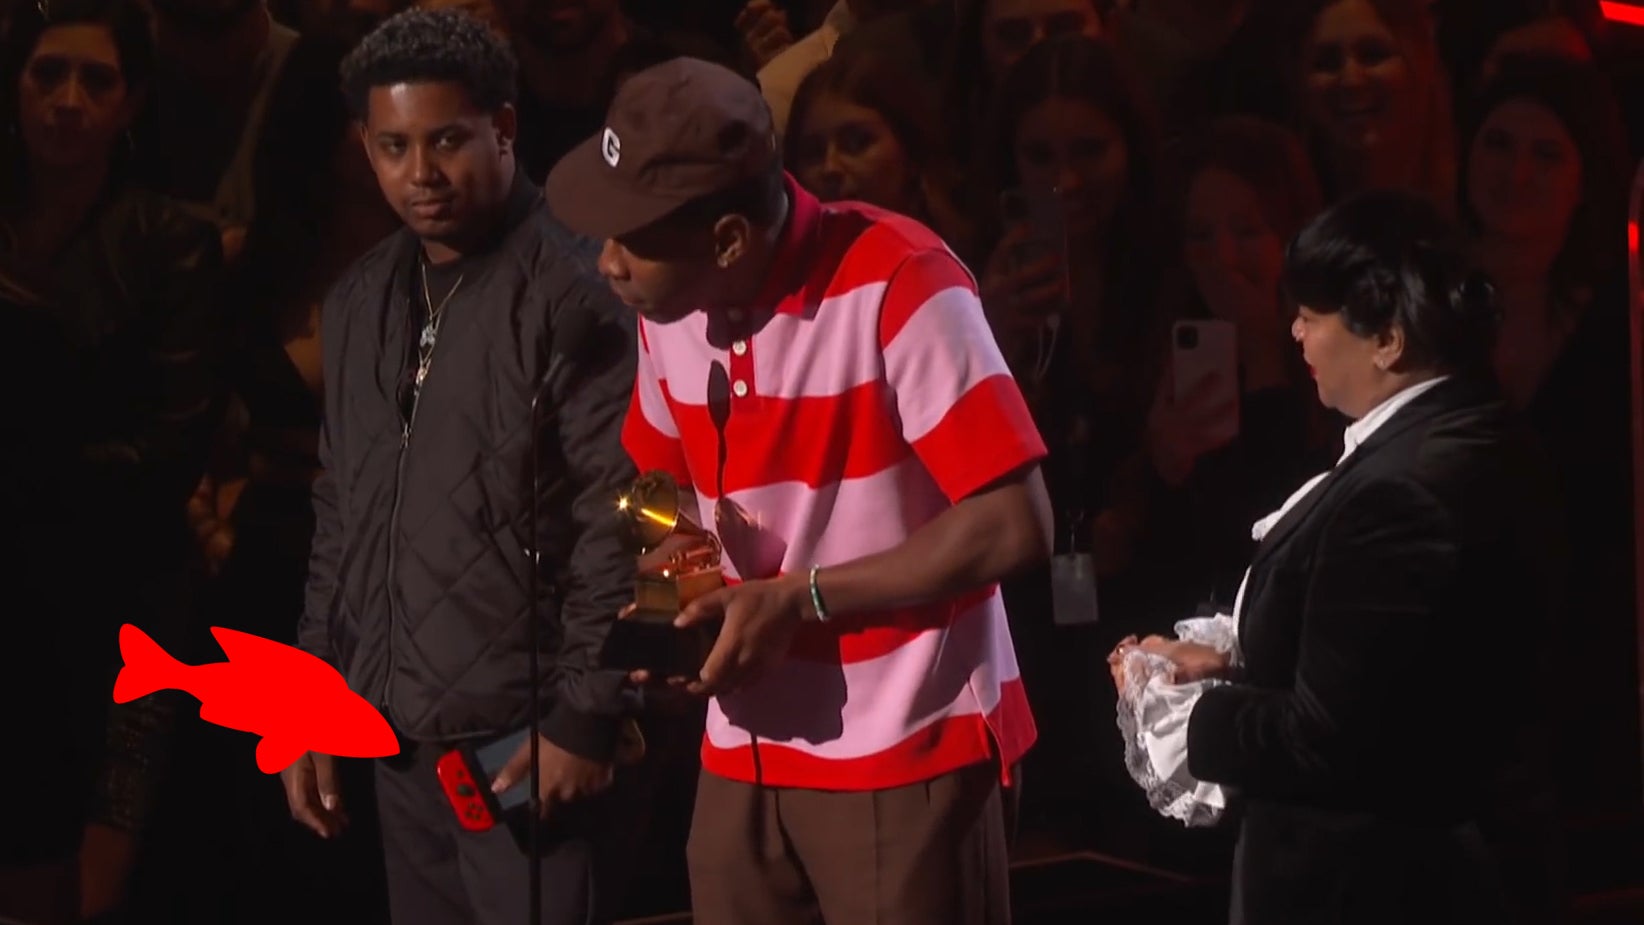 There’s A Perfectly Good Reason A Switch Was On Stage At The Grammys Last Night